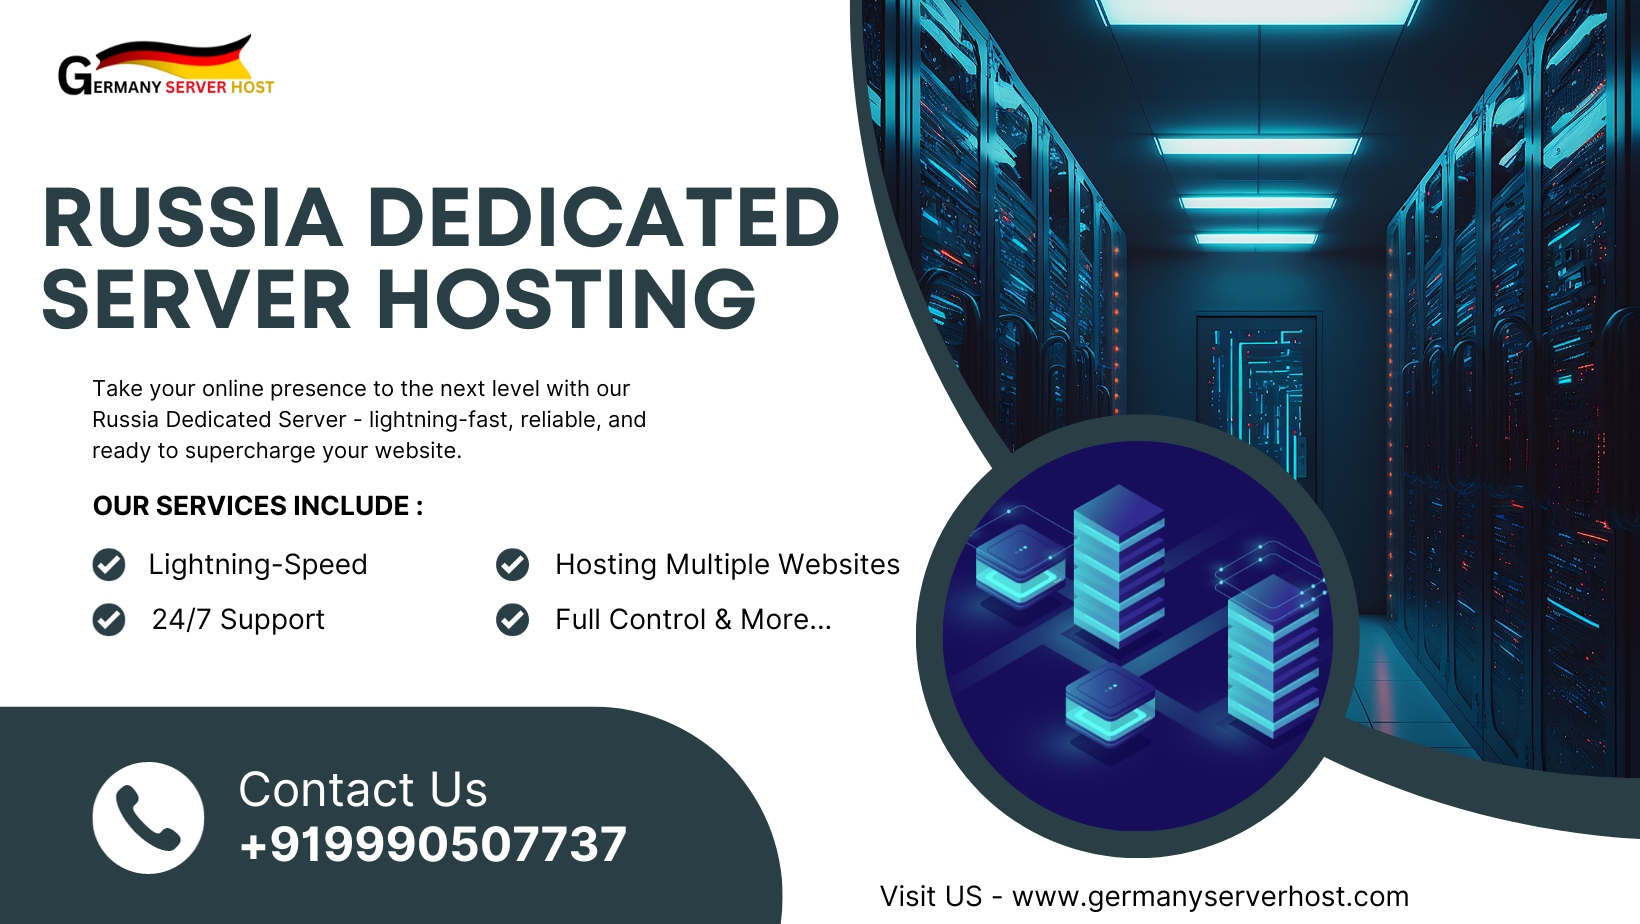 Boost Your Online Presence with Russia Dedicated Servers